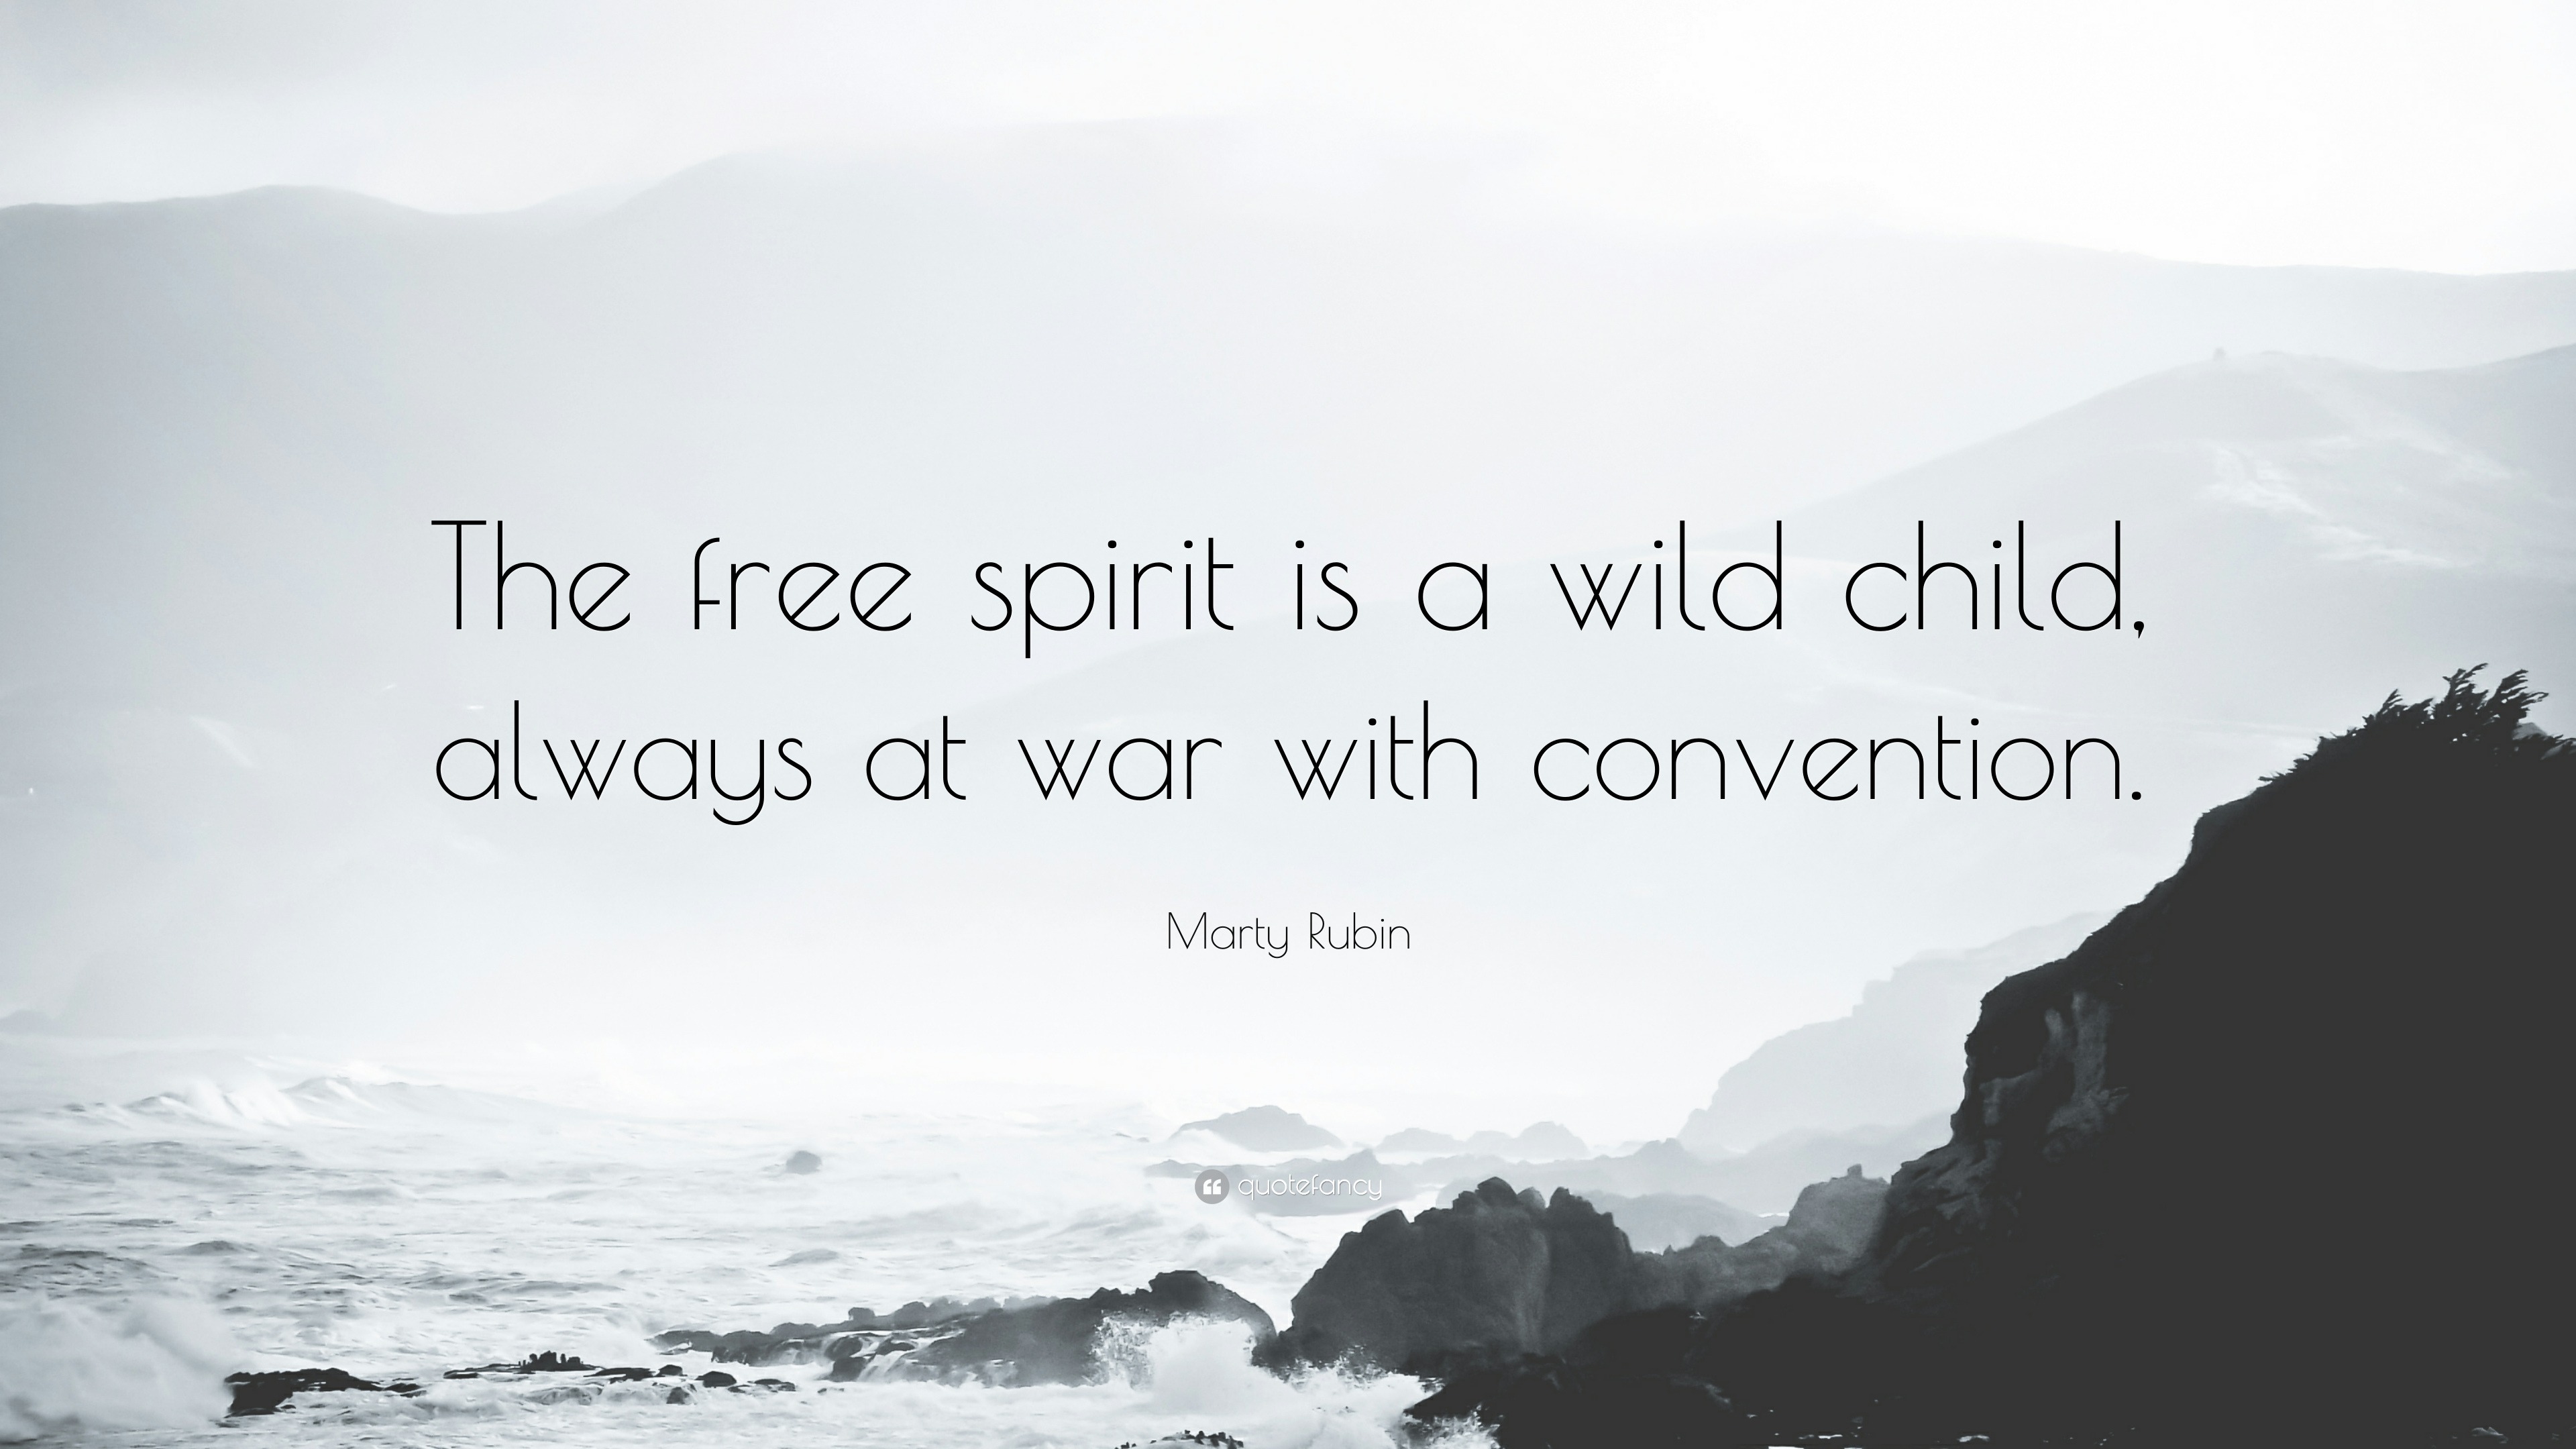 Marty Rubin Quote: “The free spirit is a wild child, always at war